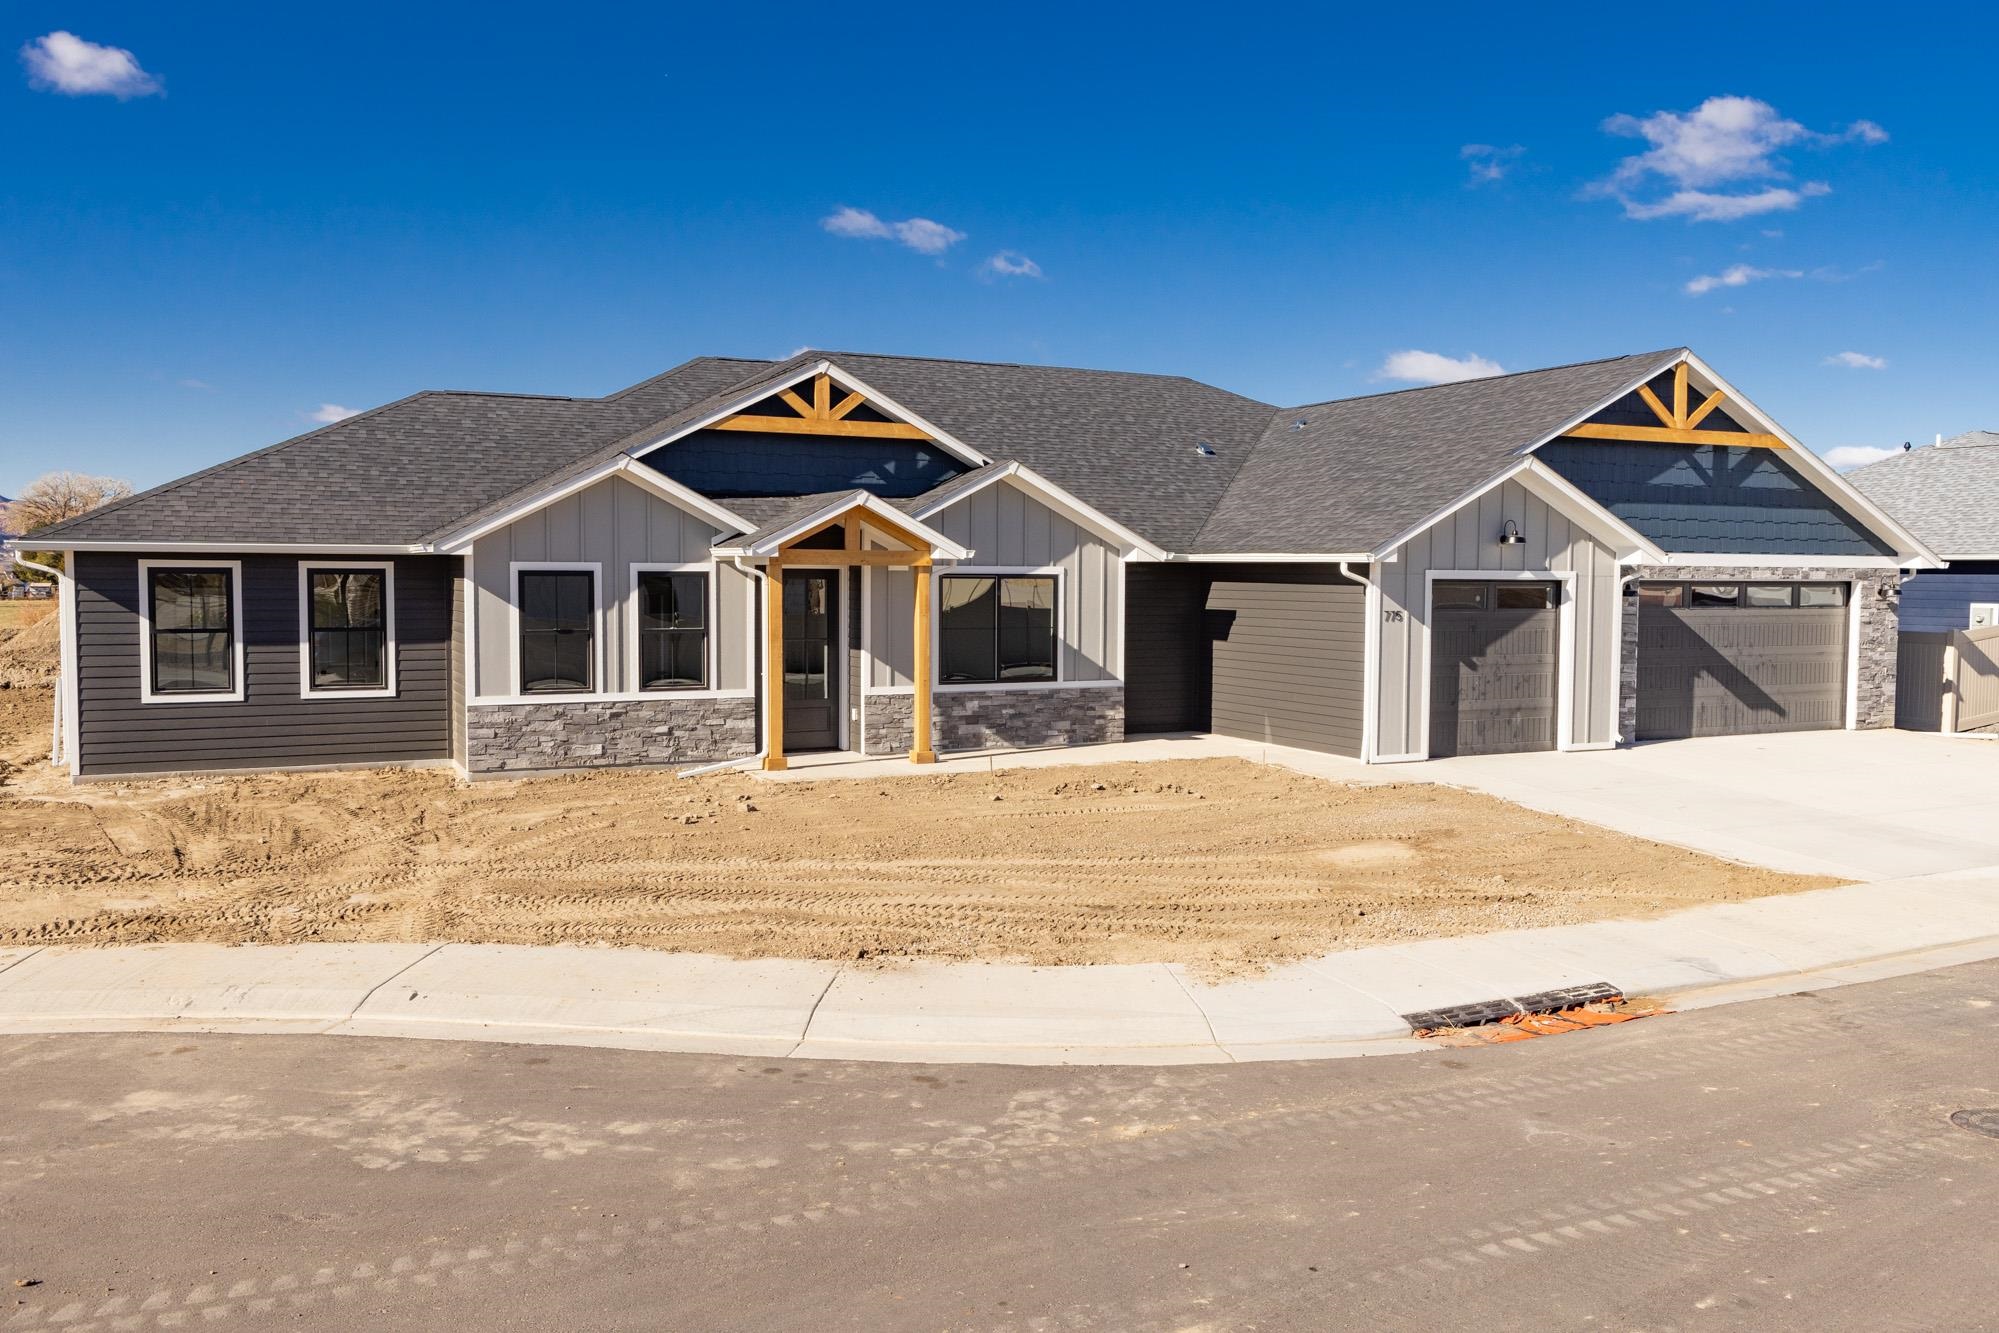 NEW CONSTRUCTION by TreyTyn Homes in Silver Spur subdivision; Northwest Grand Junction's newest country-chic subdivision that boasts incredible views, coveted location in the highly competitive Appleton school district, and near area shopping, entertainment and events! This unique floor plan has an attached ADU unit (separated from the main house) with it's own private entrance -- perfect for a mother-in-law setup or income-producing long term rental! Main house features 4 bedrooms over a flowing and functional floor plan! As you walk in the main entrance, you're greeted by a conveniently located office/bedroom space and all bedrooms conveniently located on the south side of the home. Guest bedrooms share a full bathroom, upgraded with premium cabinetry and custom tile. Primary bedroom offers a LARGE walk-in closet for plenty of storage and en-suite bath with dual vanities, oversized walk-in shower with bench seating and enclosed lavatory. Open living room and kitchen is the perfect space for entertaining guests, especially with the added ambiance of the living room electric fireplace that features glass rocks and color-changing flames! Large island and custom pendant lighting add to the richness of the space! Custom cabinetry, tile backsplash and upgraded counter tops make this kitchen space chef's quality! Eat-in dining space with access to the large covered patio. Additional dwelling unit sits to the west of the oversized 3-car garage and features full kitchen, large living/dining room area and one bedroom with full bathroom! Property has plenty of RV parking on the south side of the home and offers incredible east-facing Grand Valley views!